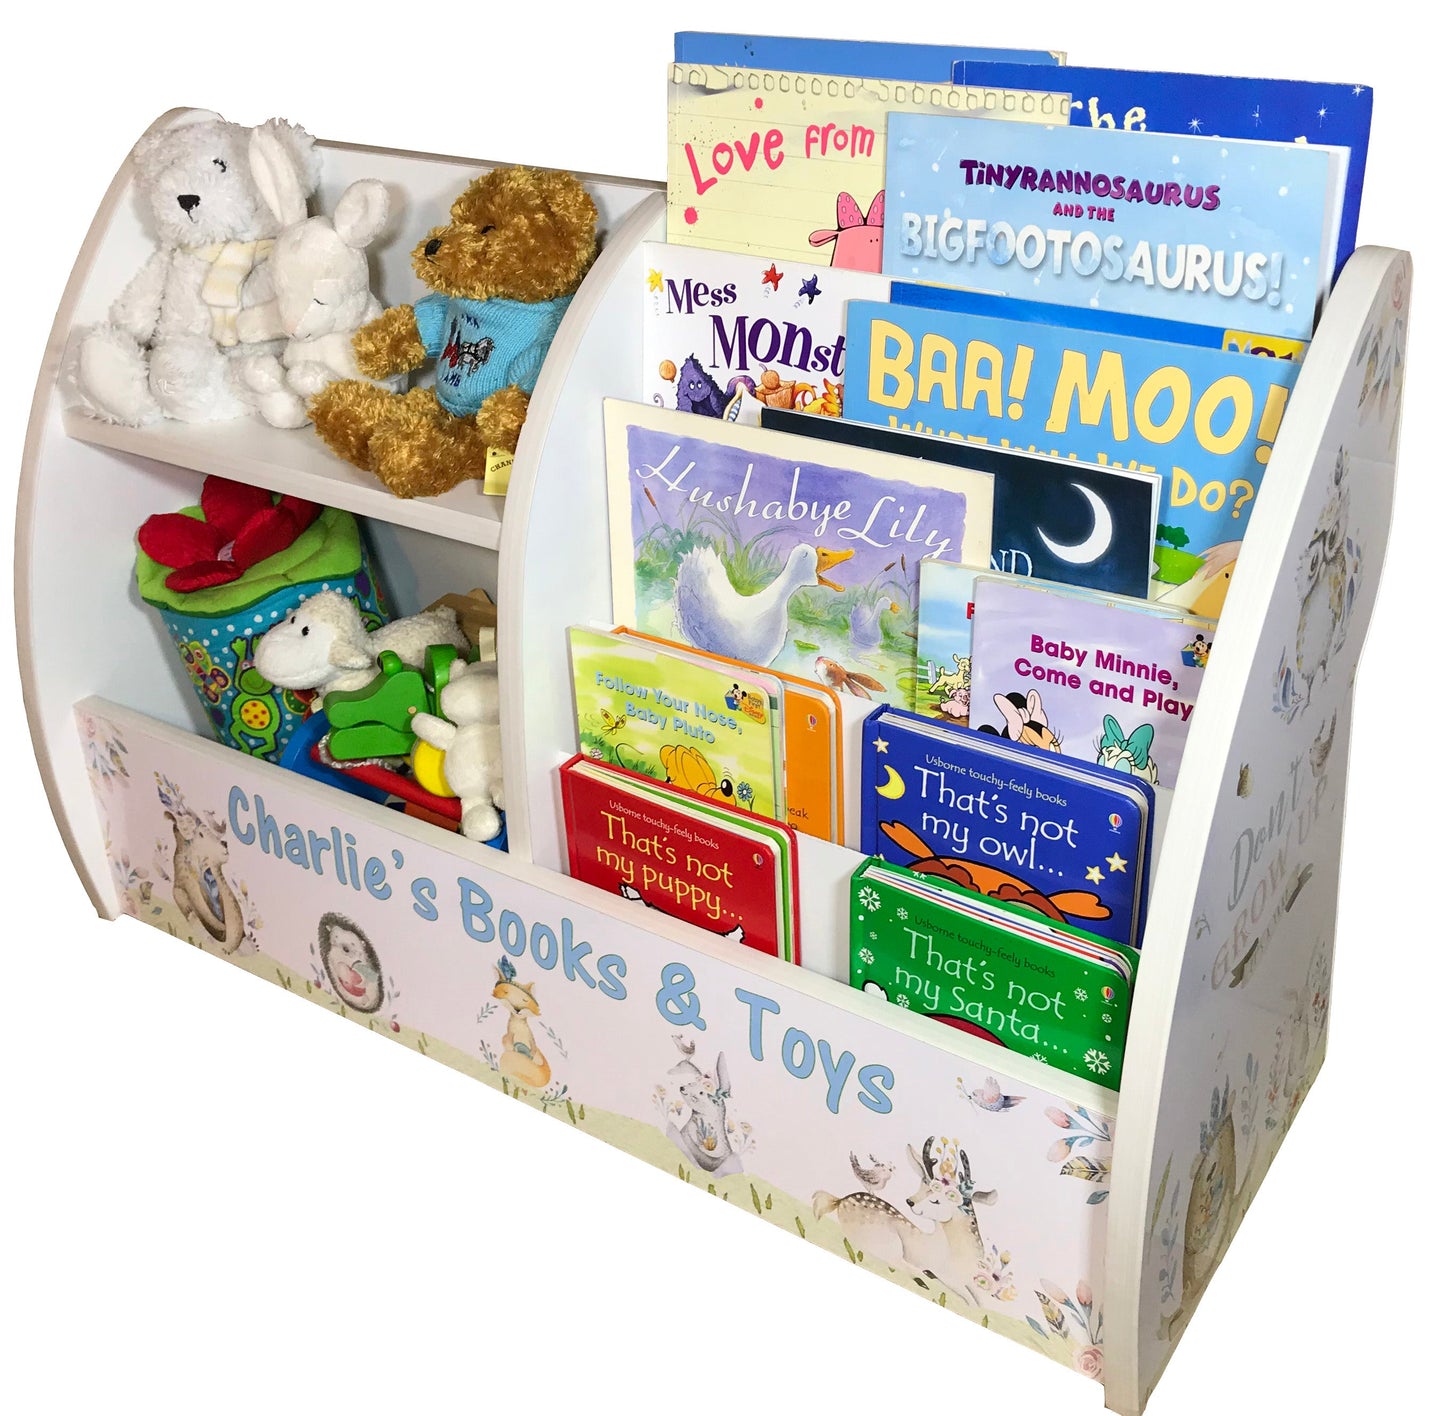 Readers Books and Toys Stand